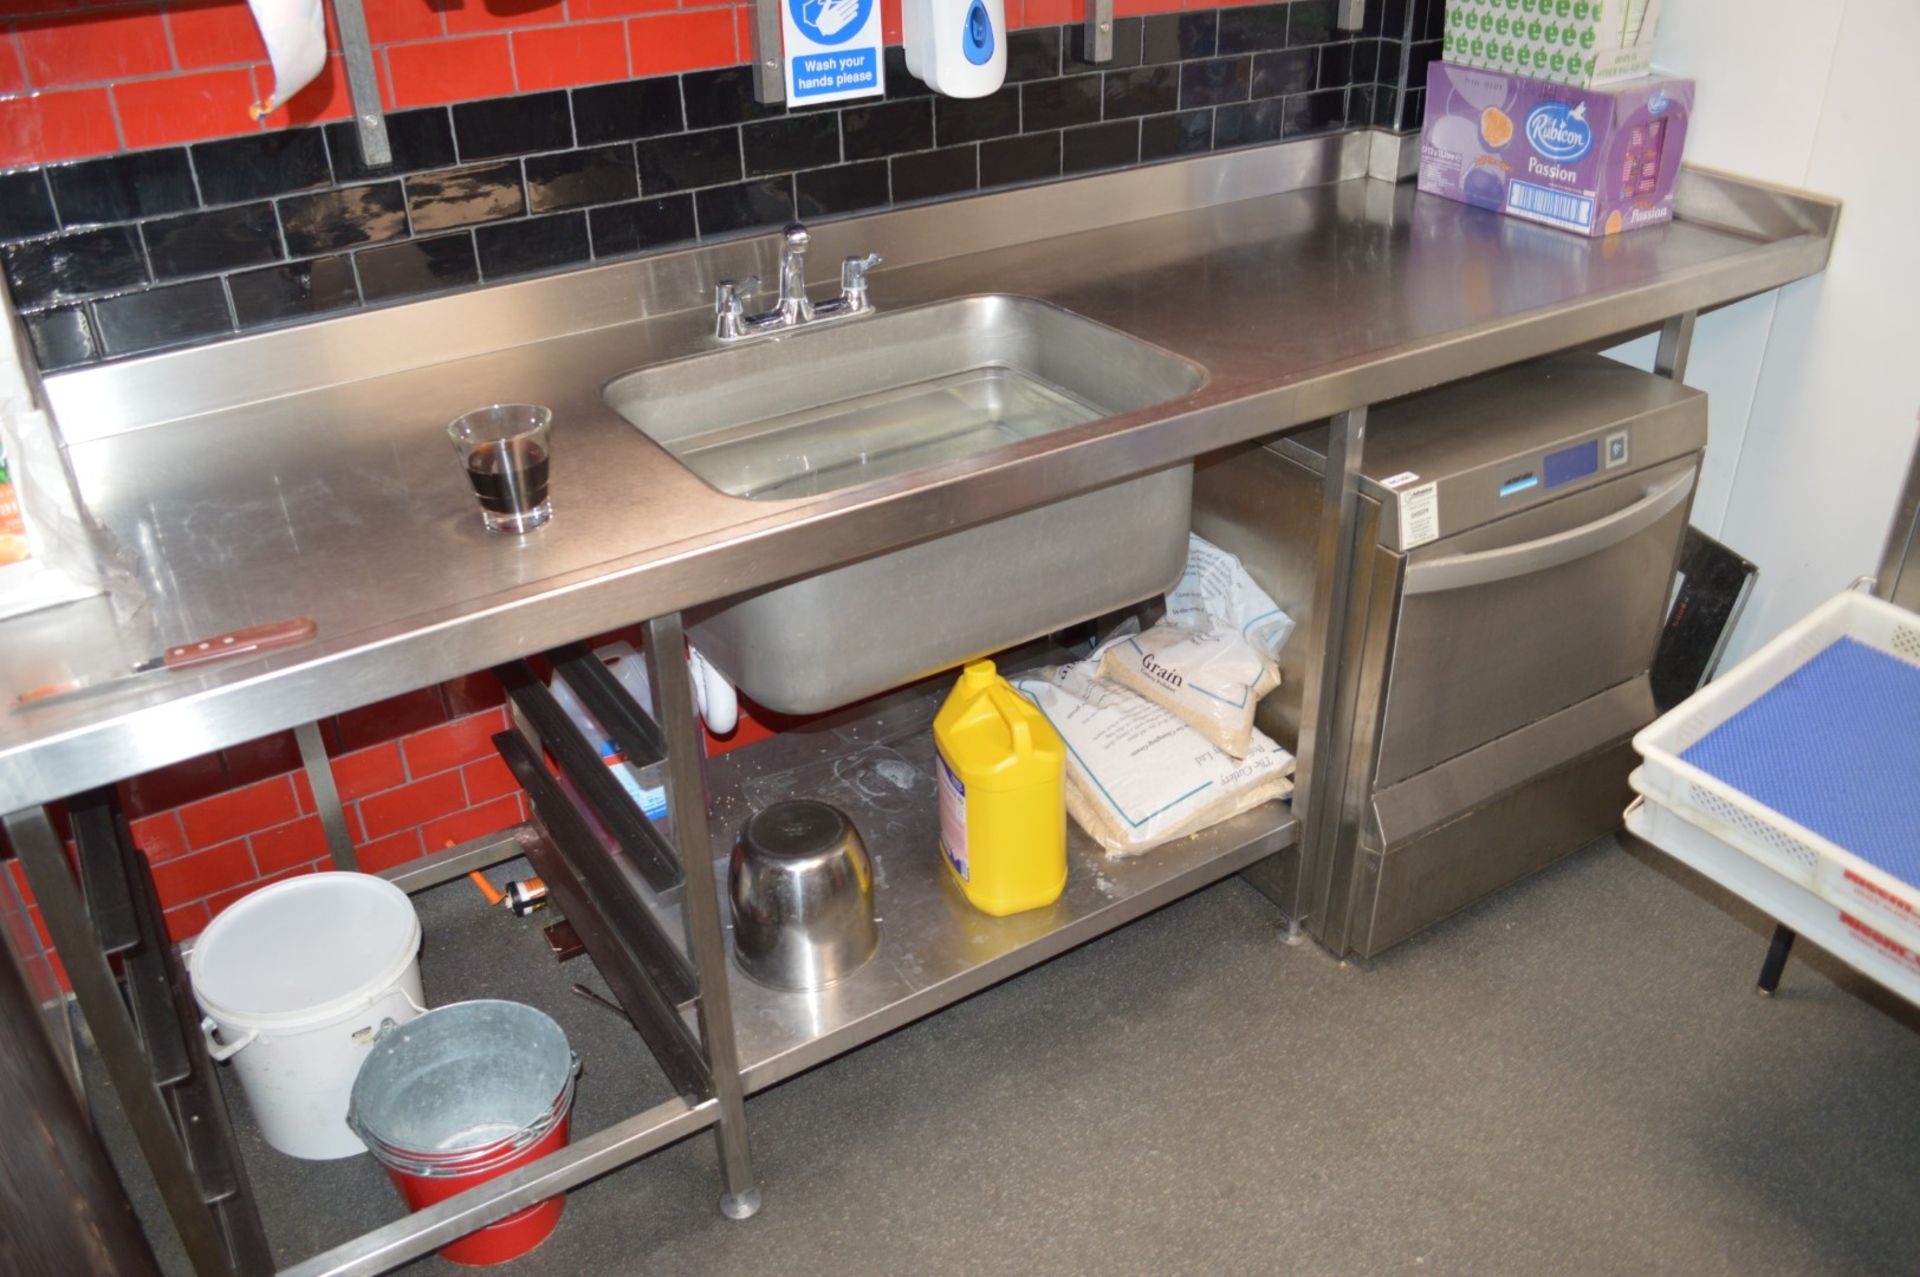 1 x Large Stainless Steel Wash Prep Table - Features Large Sink Bowl With Mixer Taps, Undershelf,